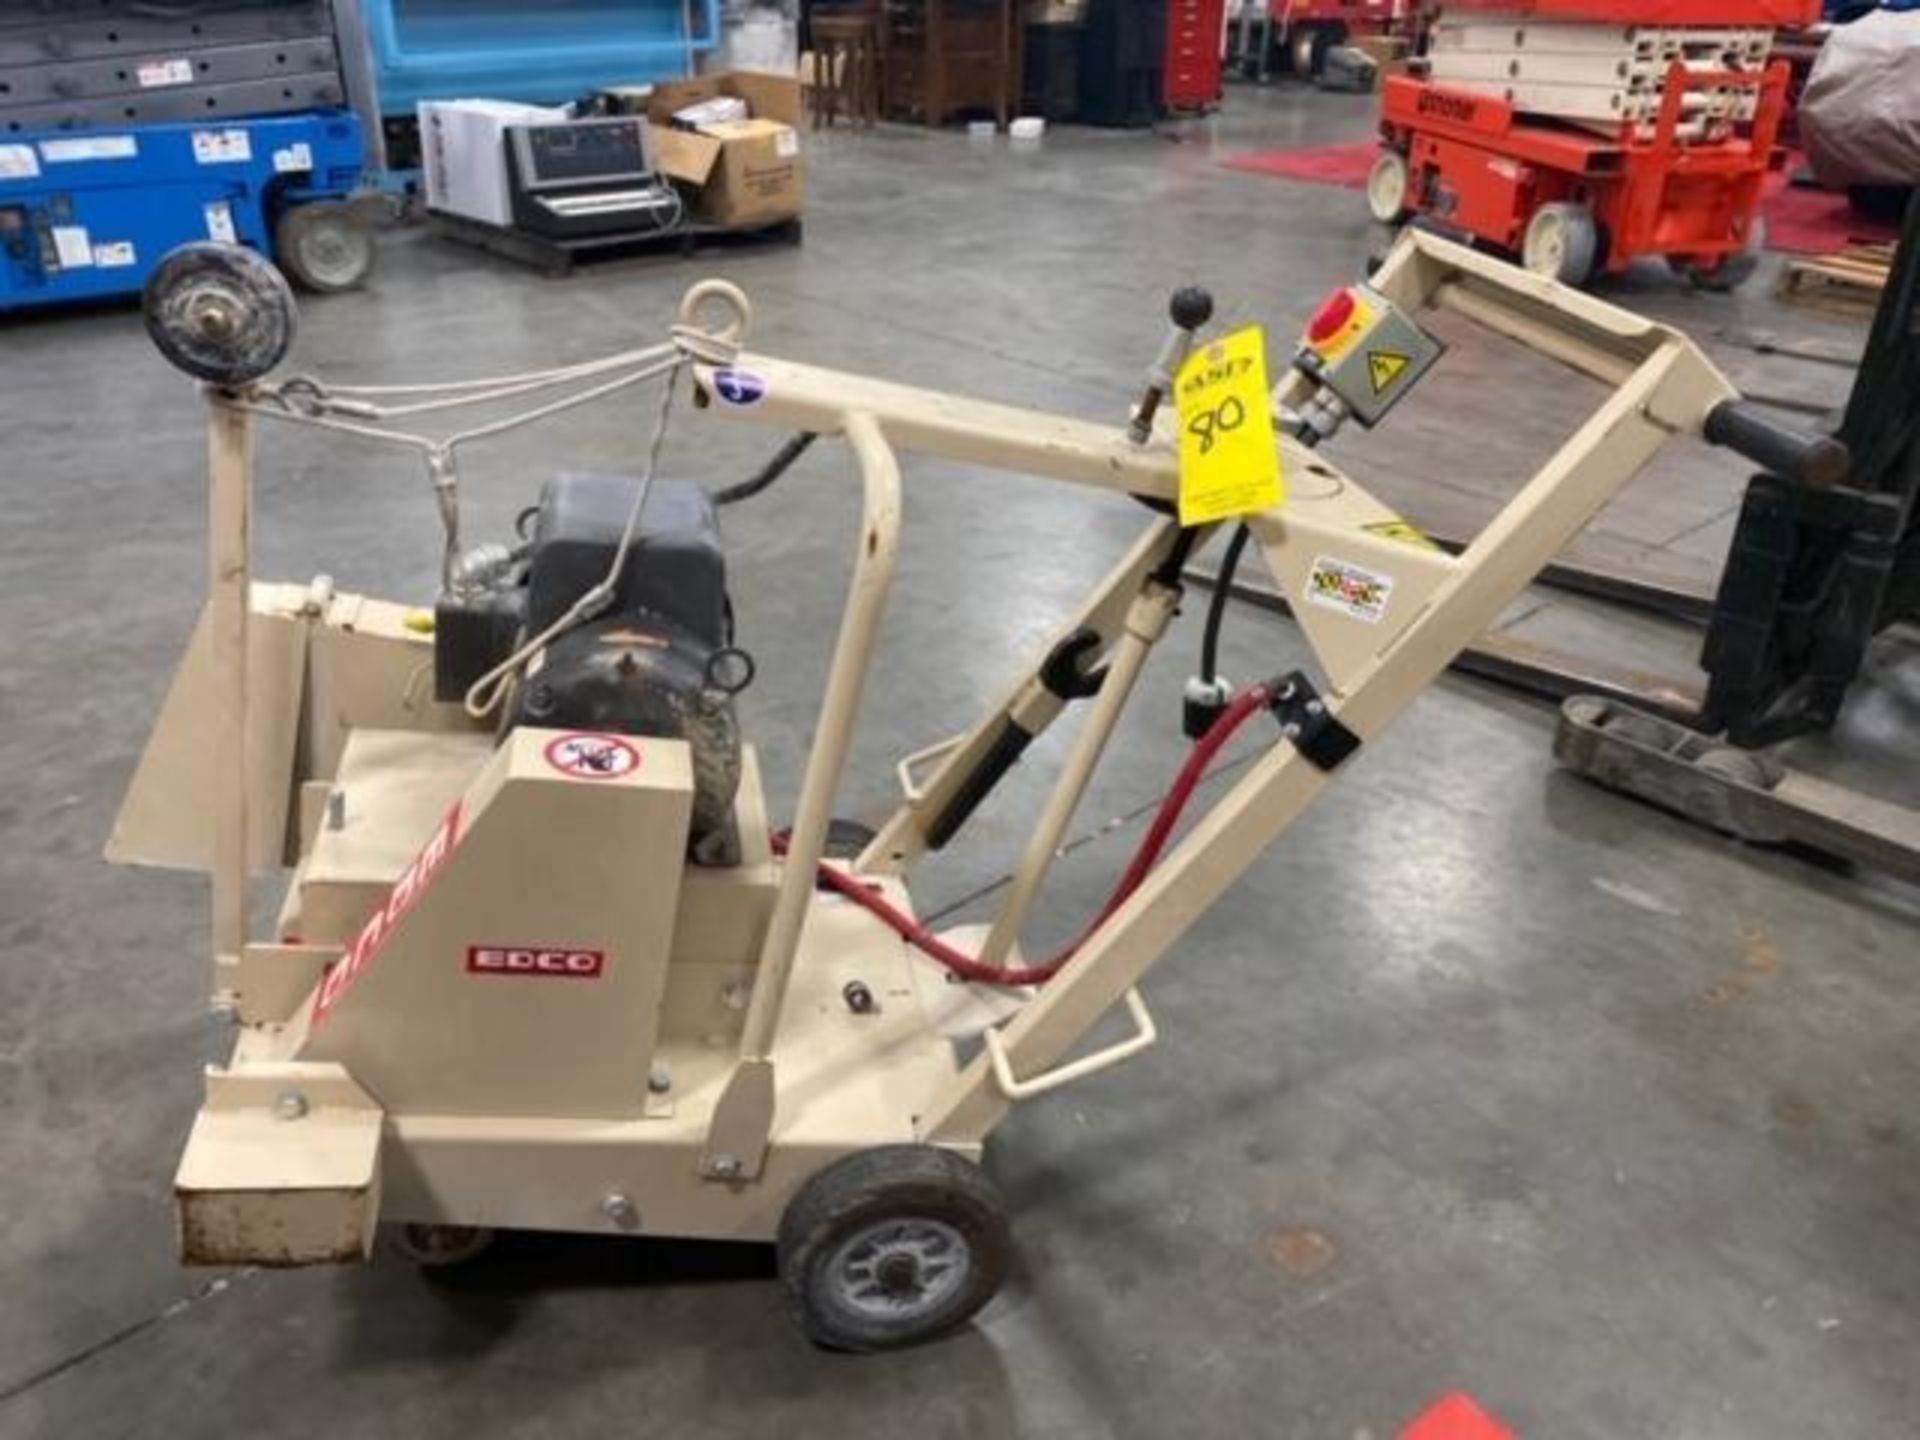 2017 EDCO DS-18-5 WALKBEHIND SAW SUPPORT EQUIPMENT - Image 8 of 20